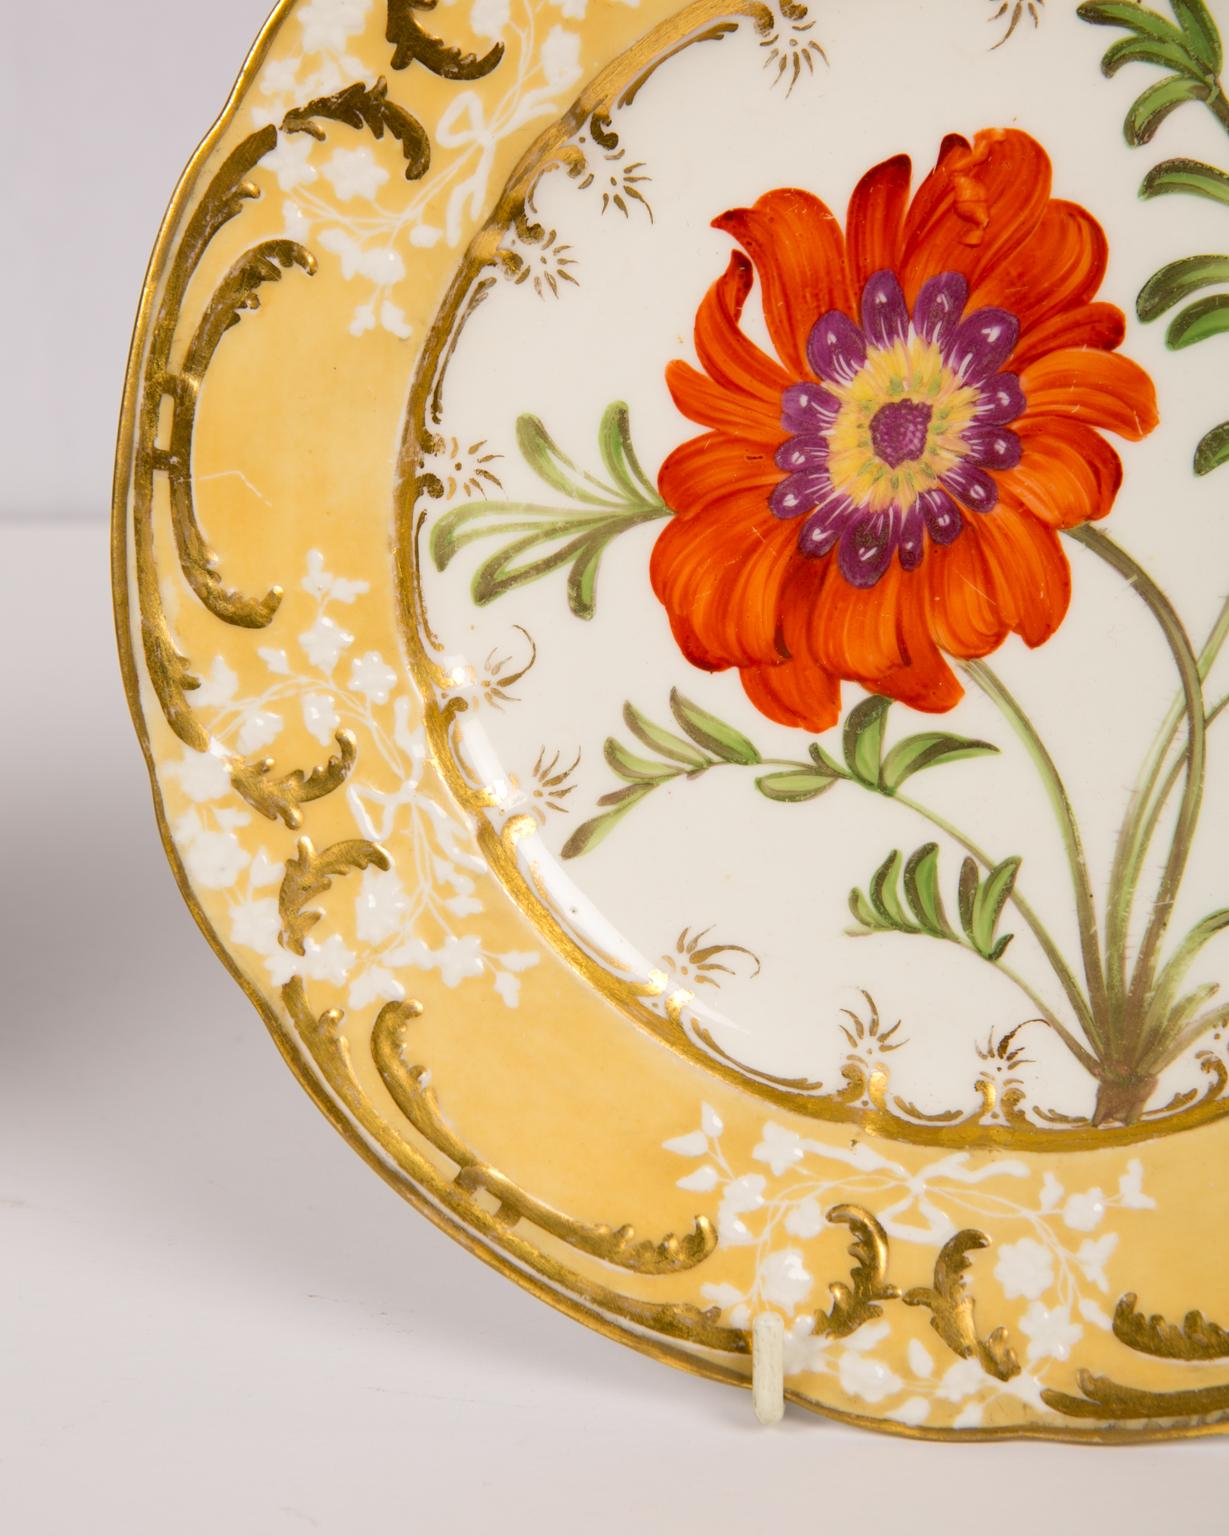 Porcelain Pair of Antique Dishes with Single Hand-Painted Flower circa 1825